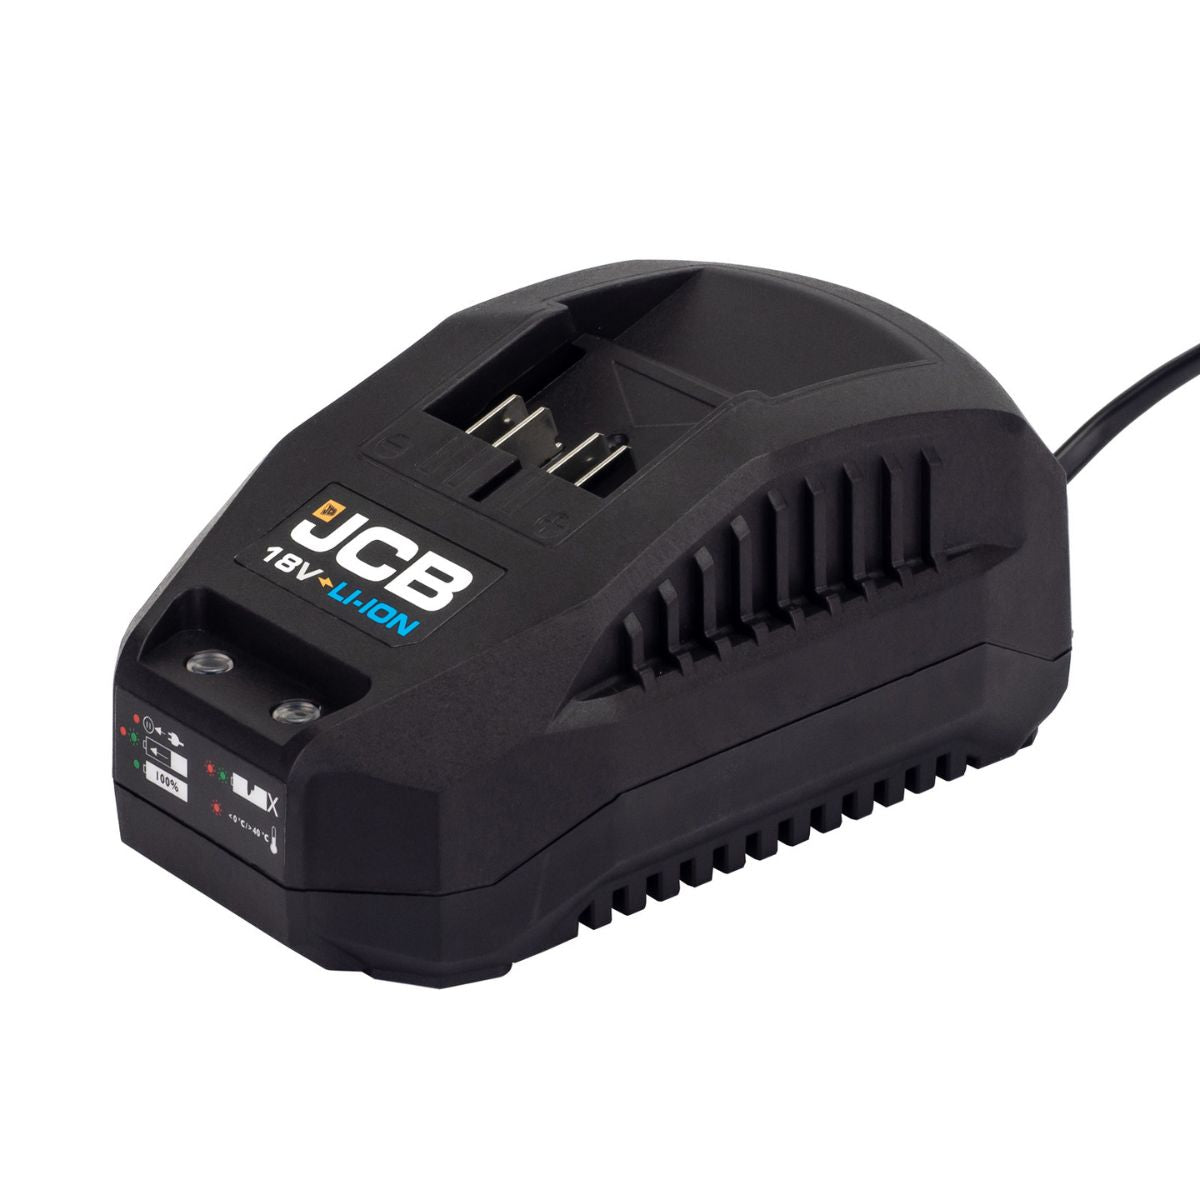 JCB 21-18BLID-2X-B 18V Brushless Impact Driver with 1x2.0Ah Battery & Charger